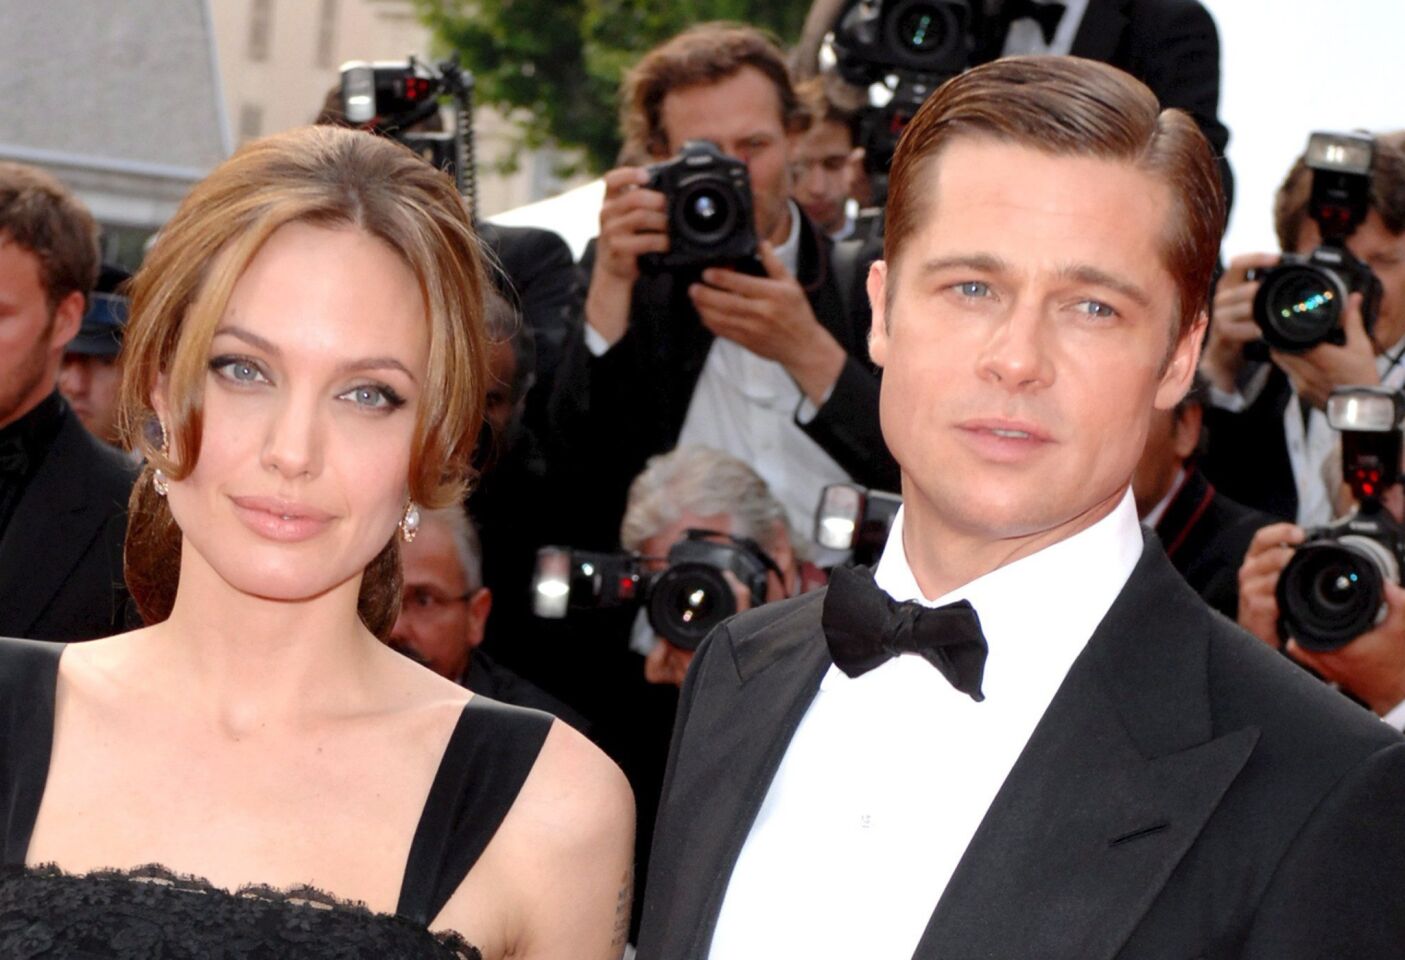 Angelina Jolie and Brad Pitt arrive at the Festival Palace for a gala screening of the film "A Mighty Heart" running out of competition at the 60th Cannes Film Festival, on May 21, 2007.